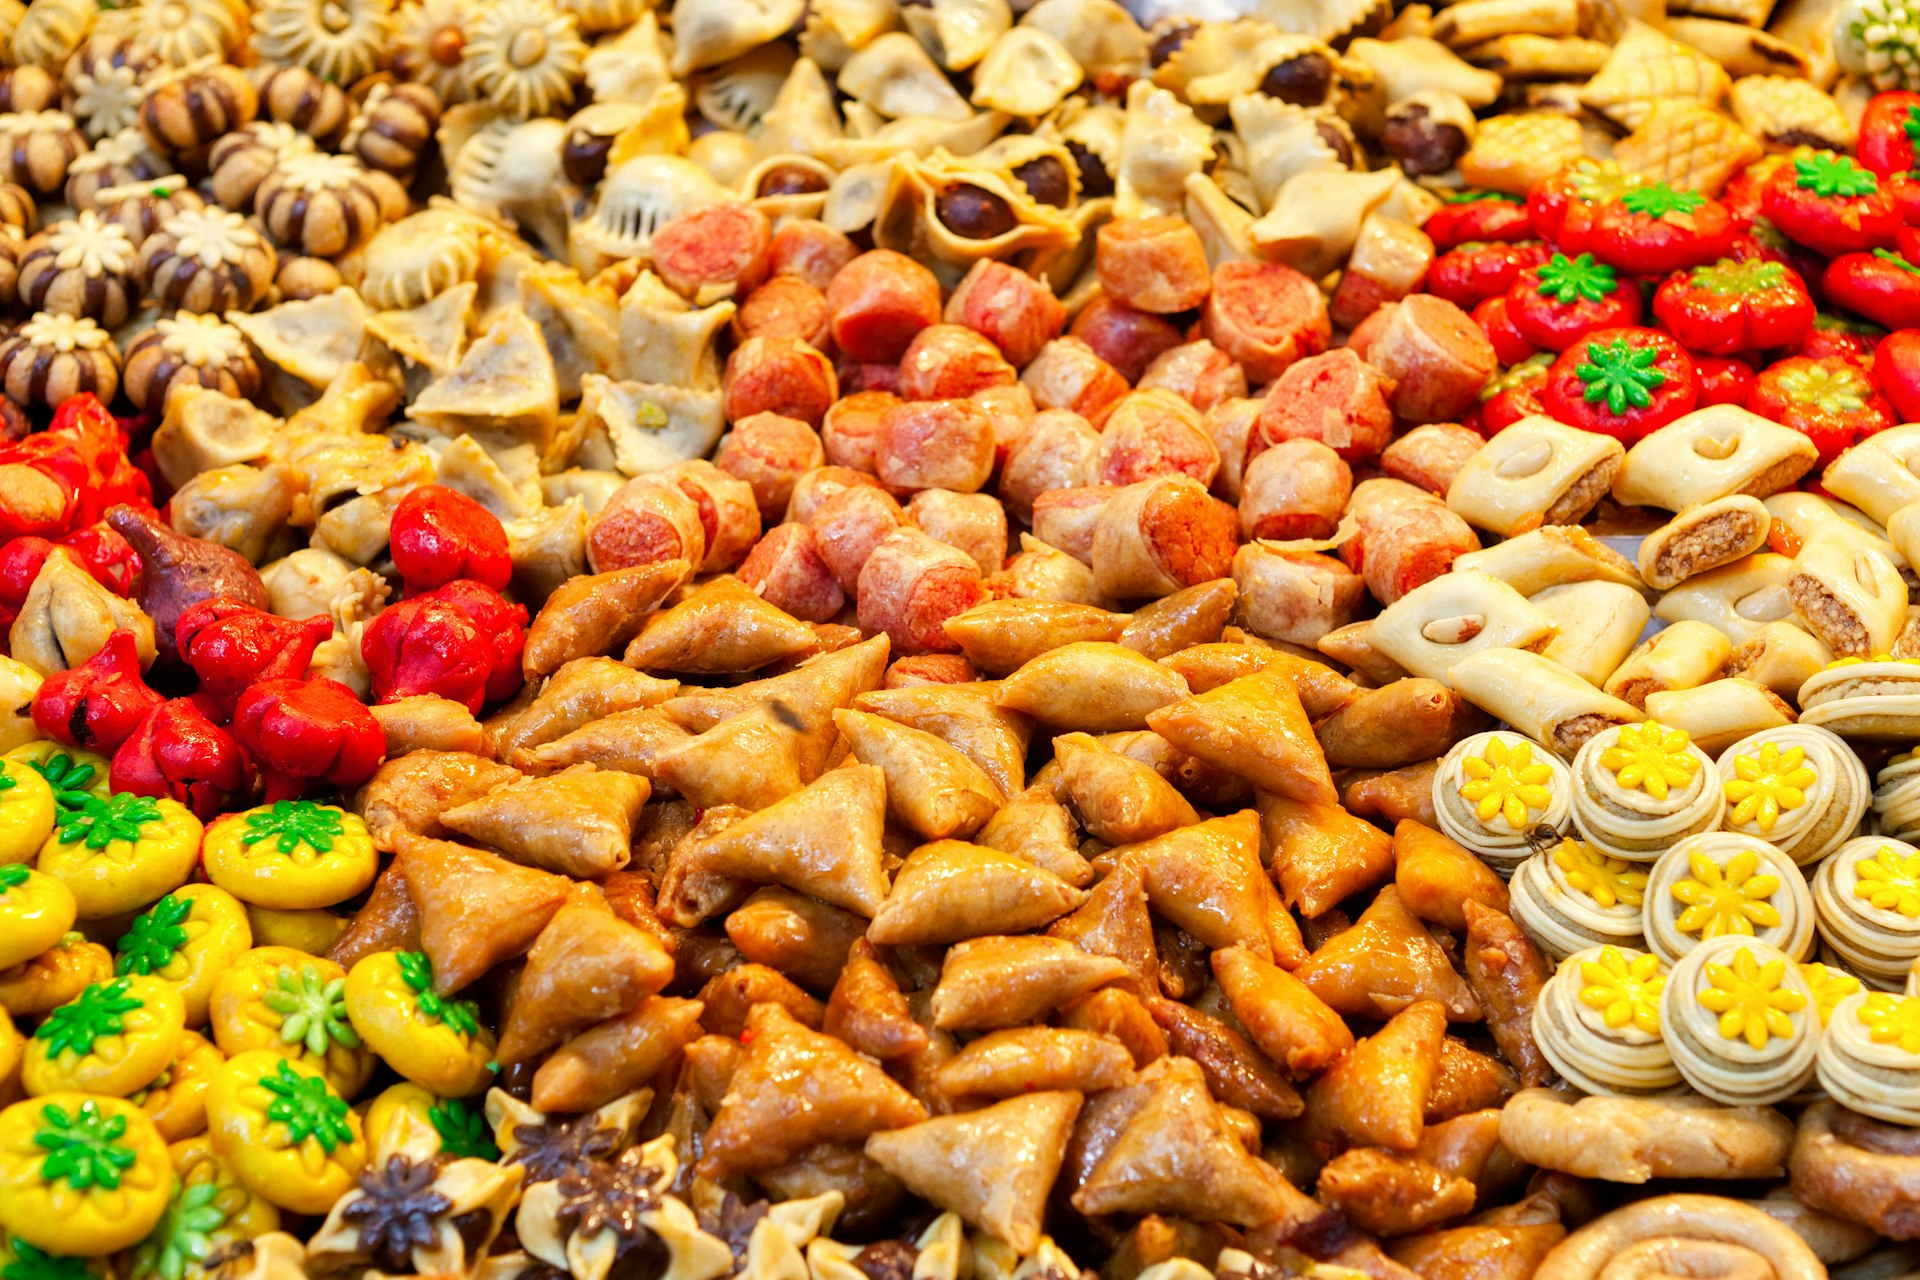 Closeup of a stall filled with traditional moroccan sweets on sale at a Marrakesh market